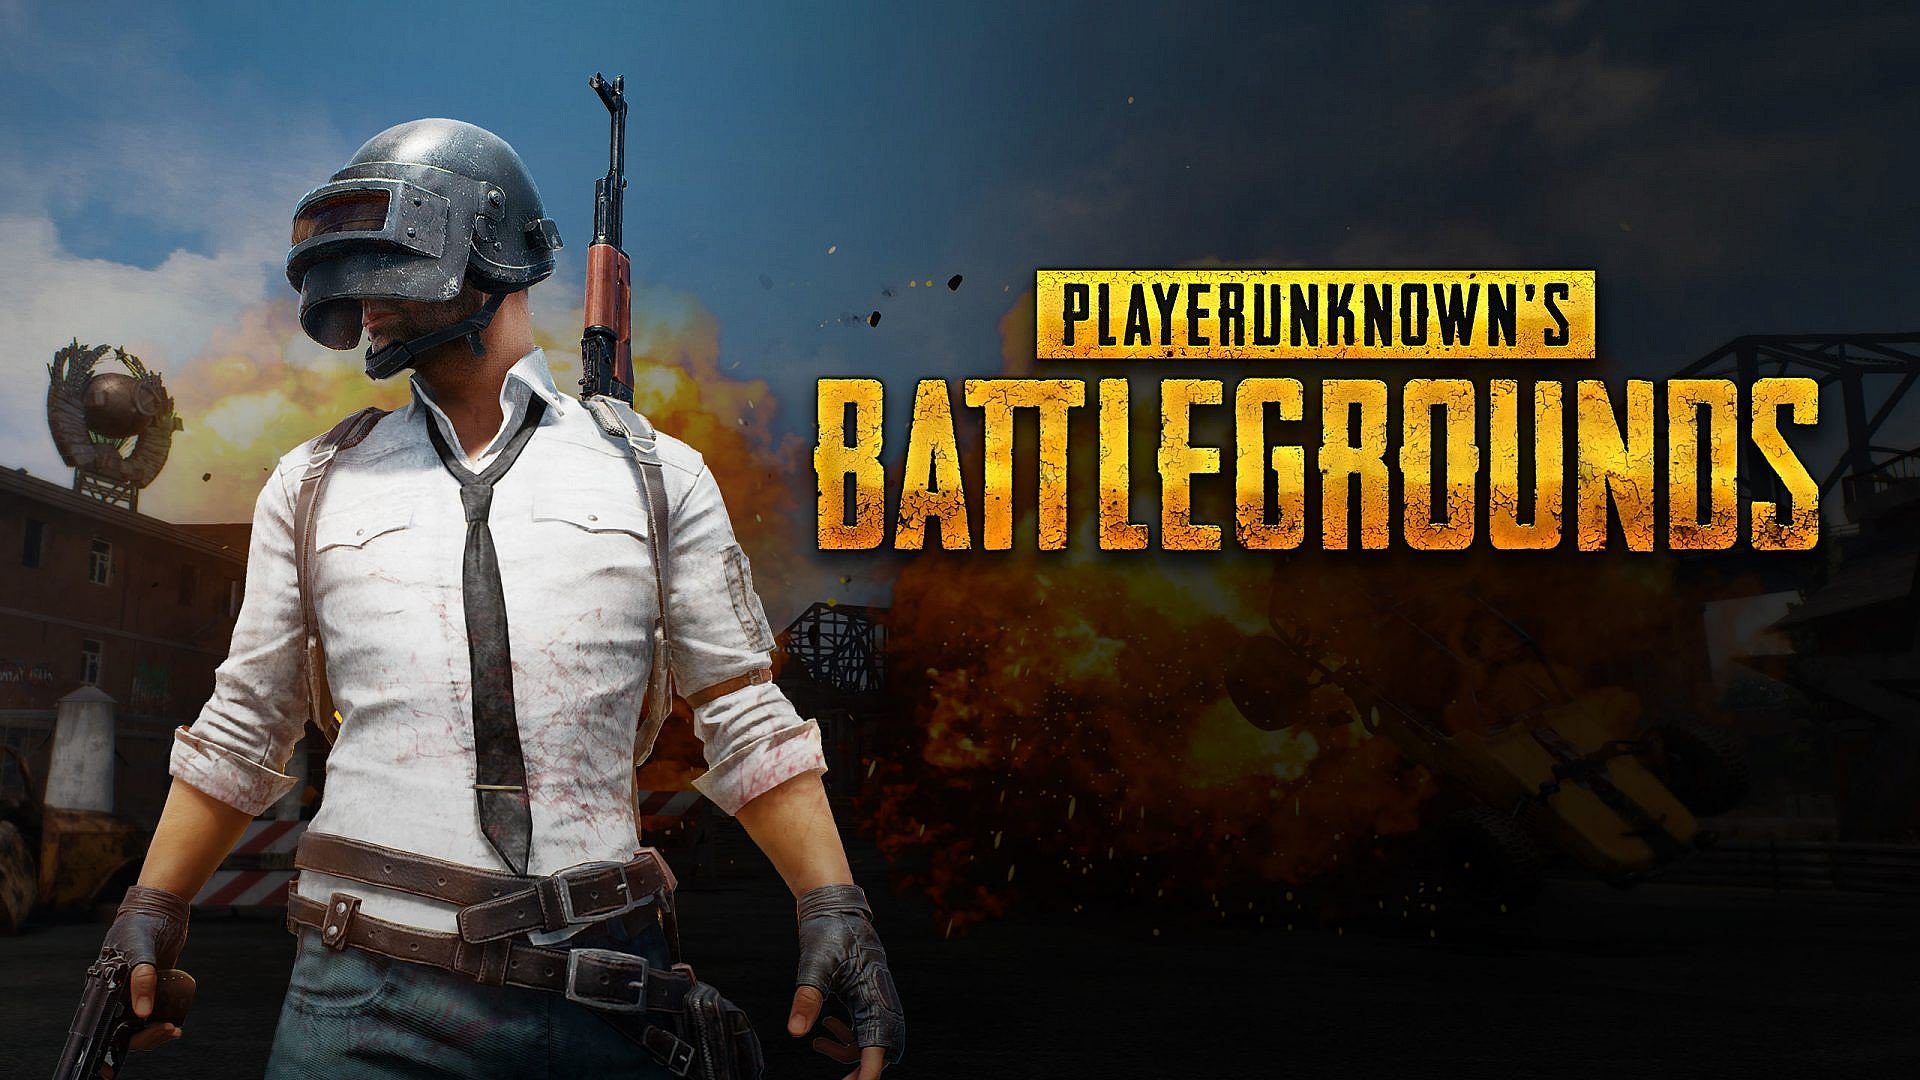 PlayerUnknown's Battlegrounds (PUBG) will be free to play for Xbox Live Gold members next weekend